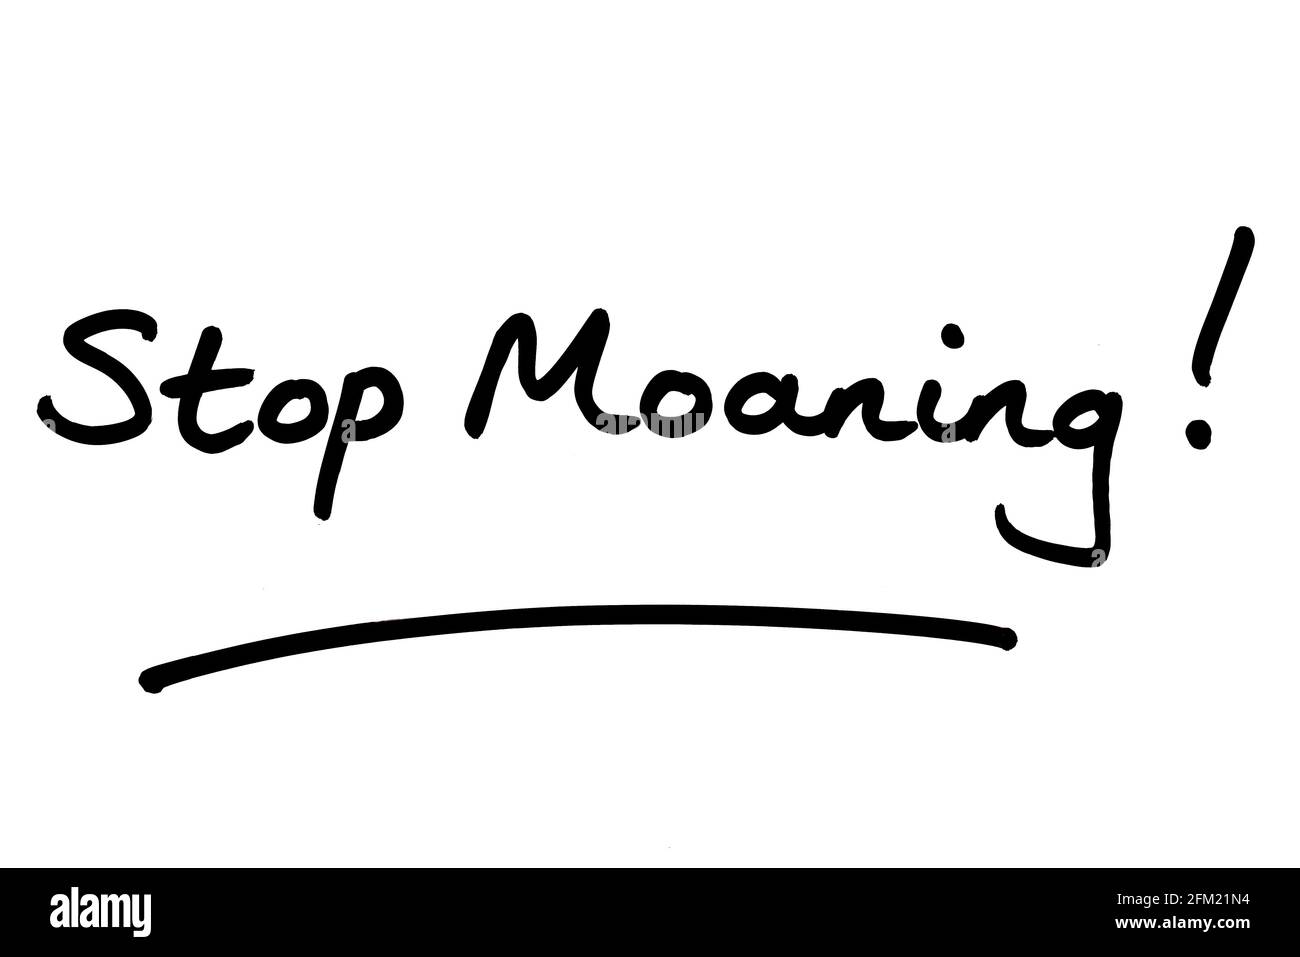 Stop Moaning! handwritten on a white background. Stock Photo